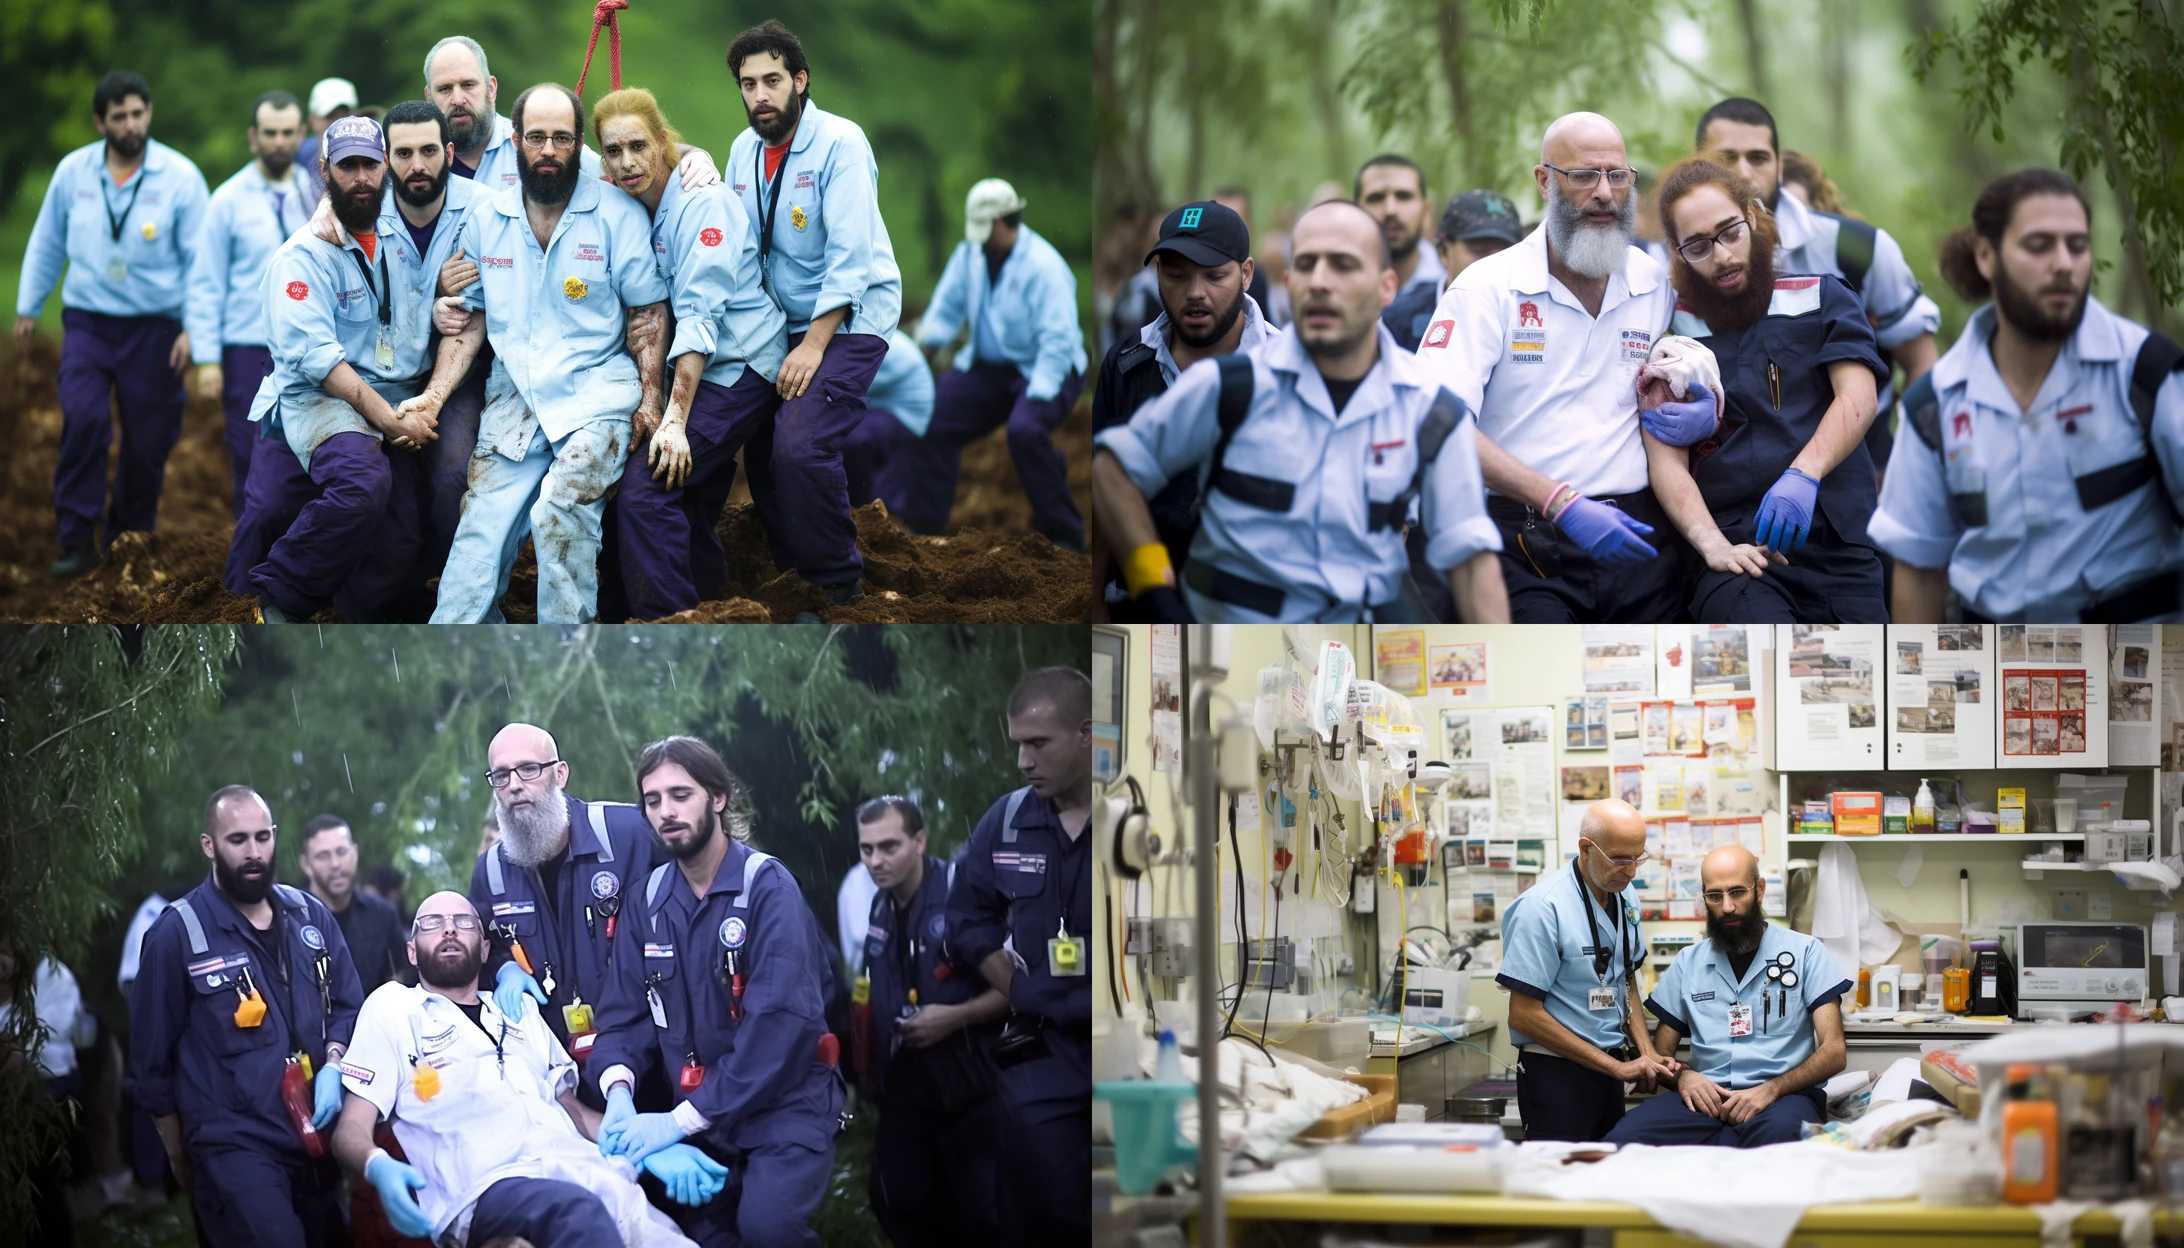 A photo of emergency medical service workers from Magen David Adom, highlighting their selfless efforts in saving lives.